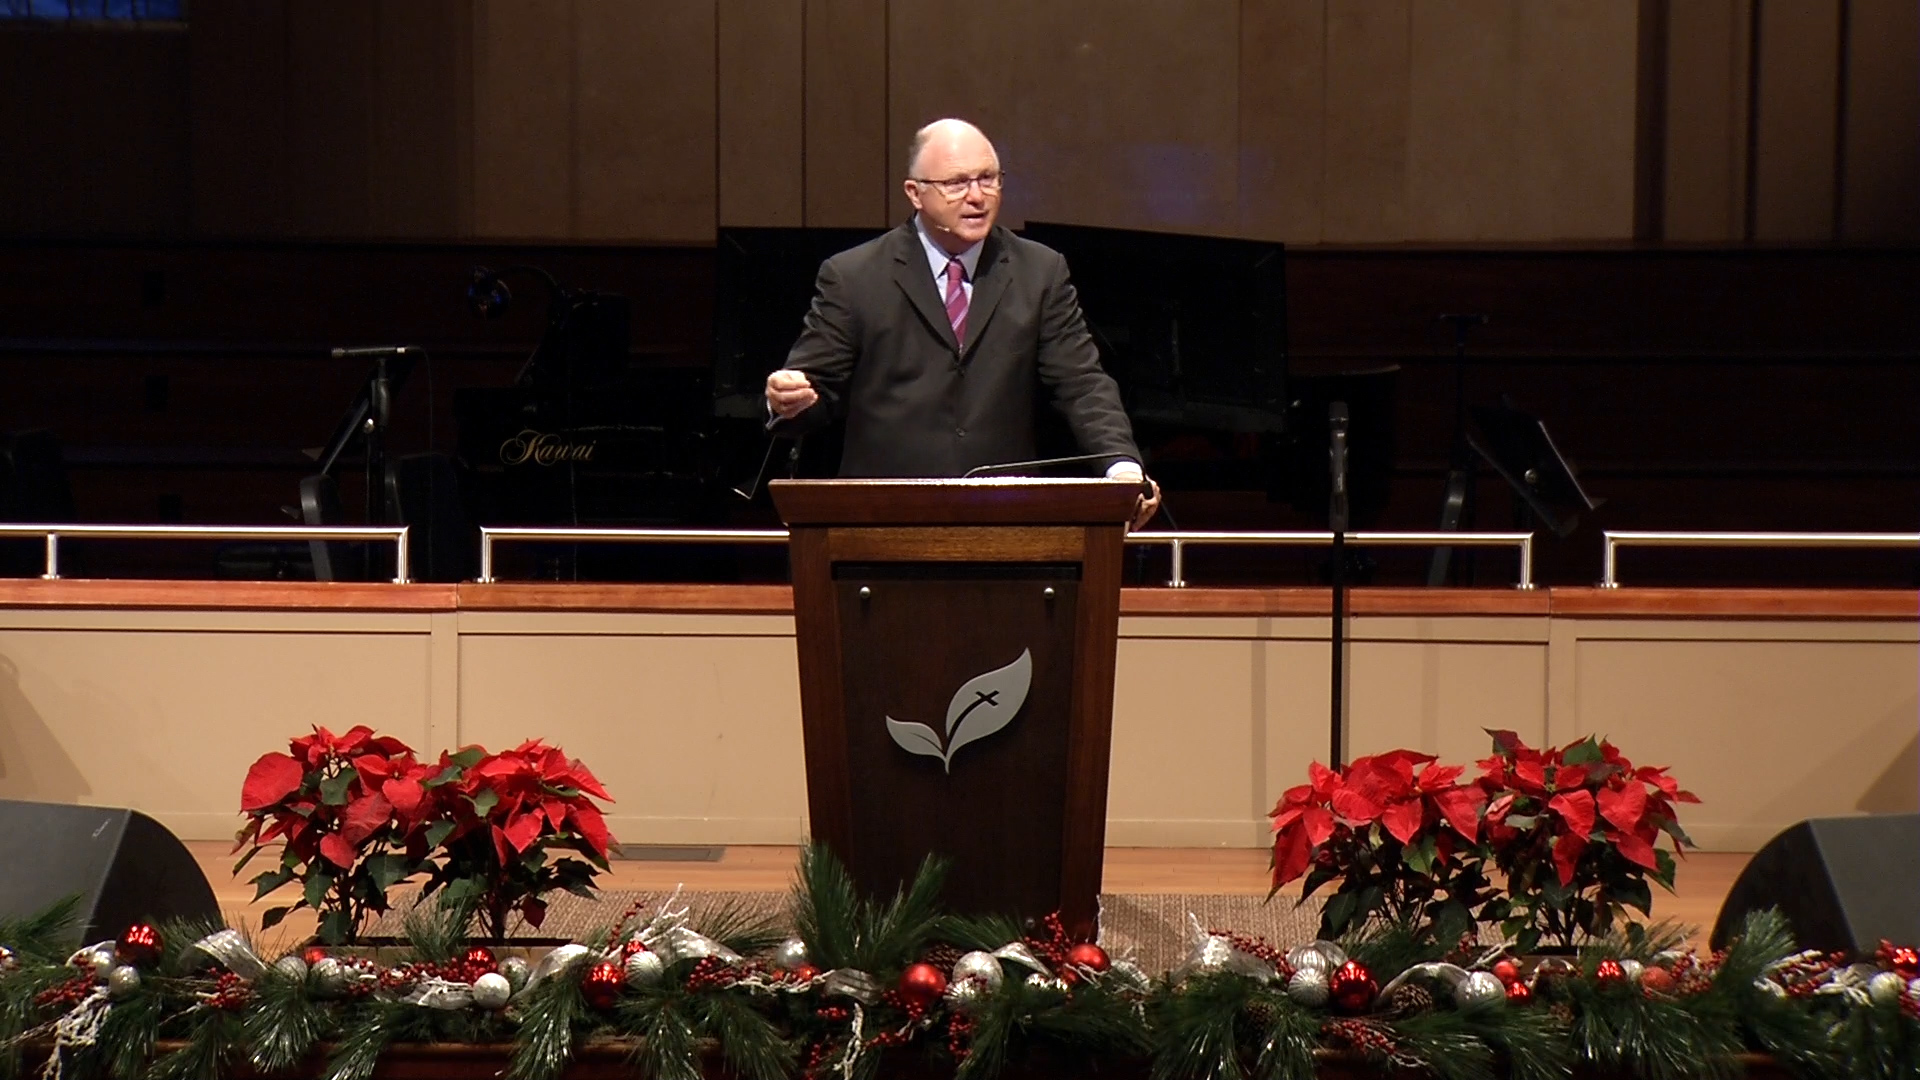 Pastor Paul Chappell: The Witnesses of Grace